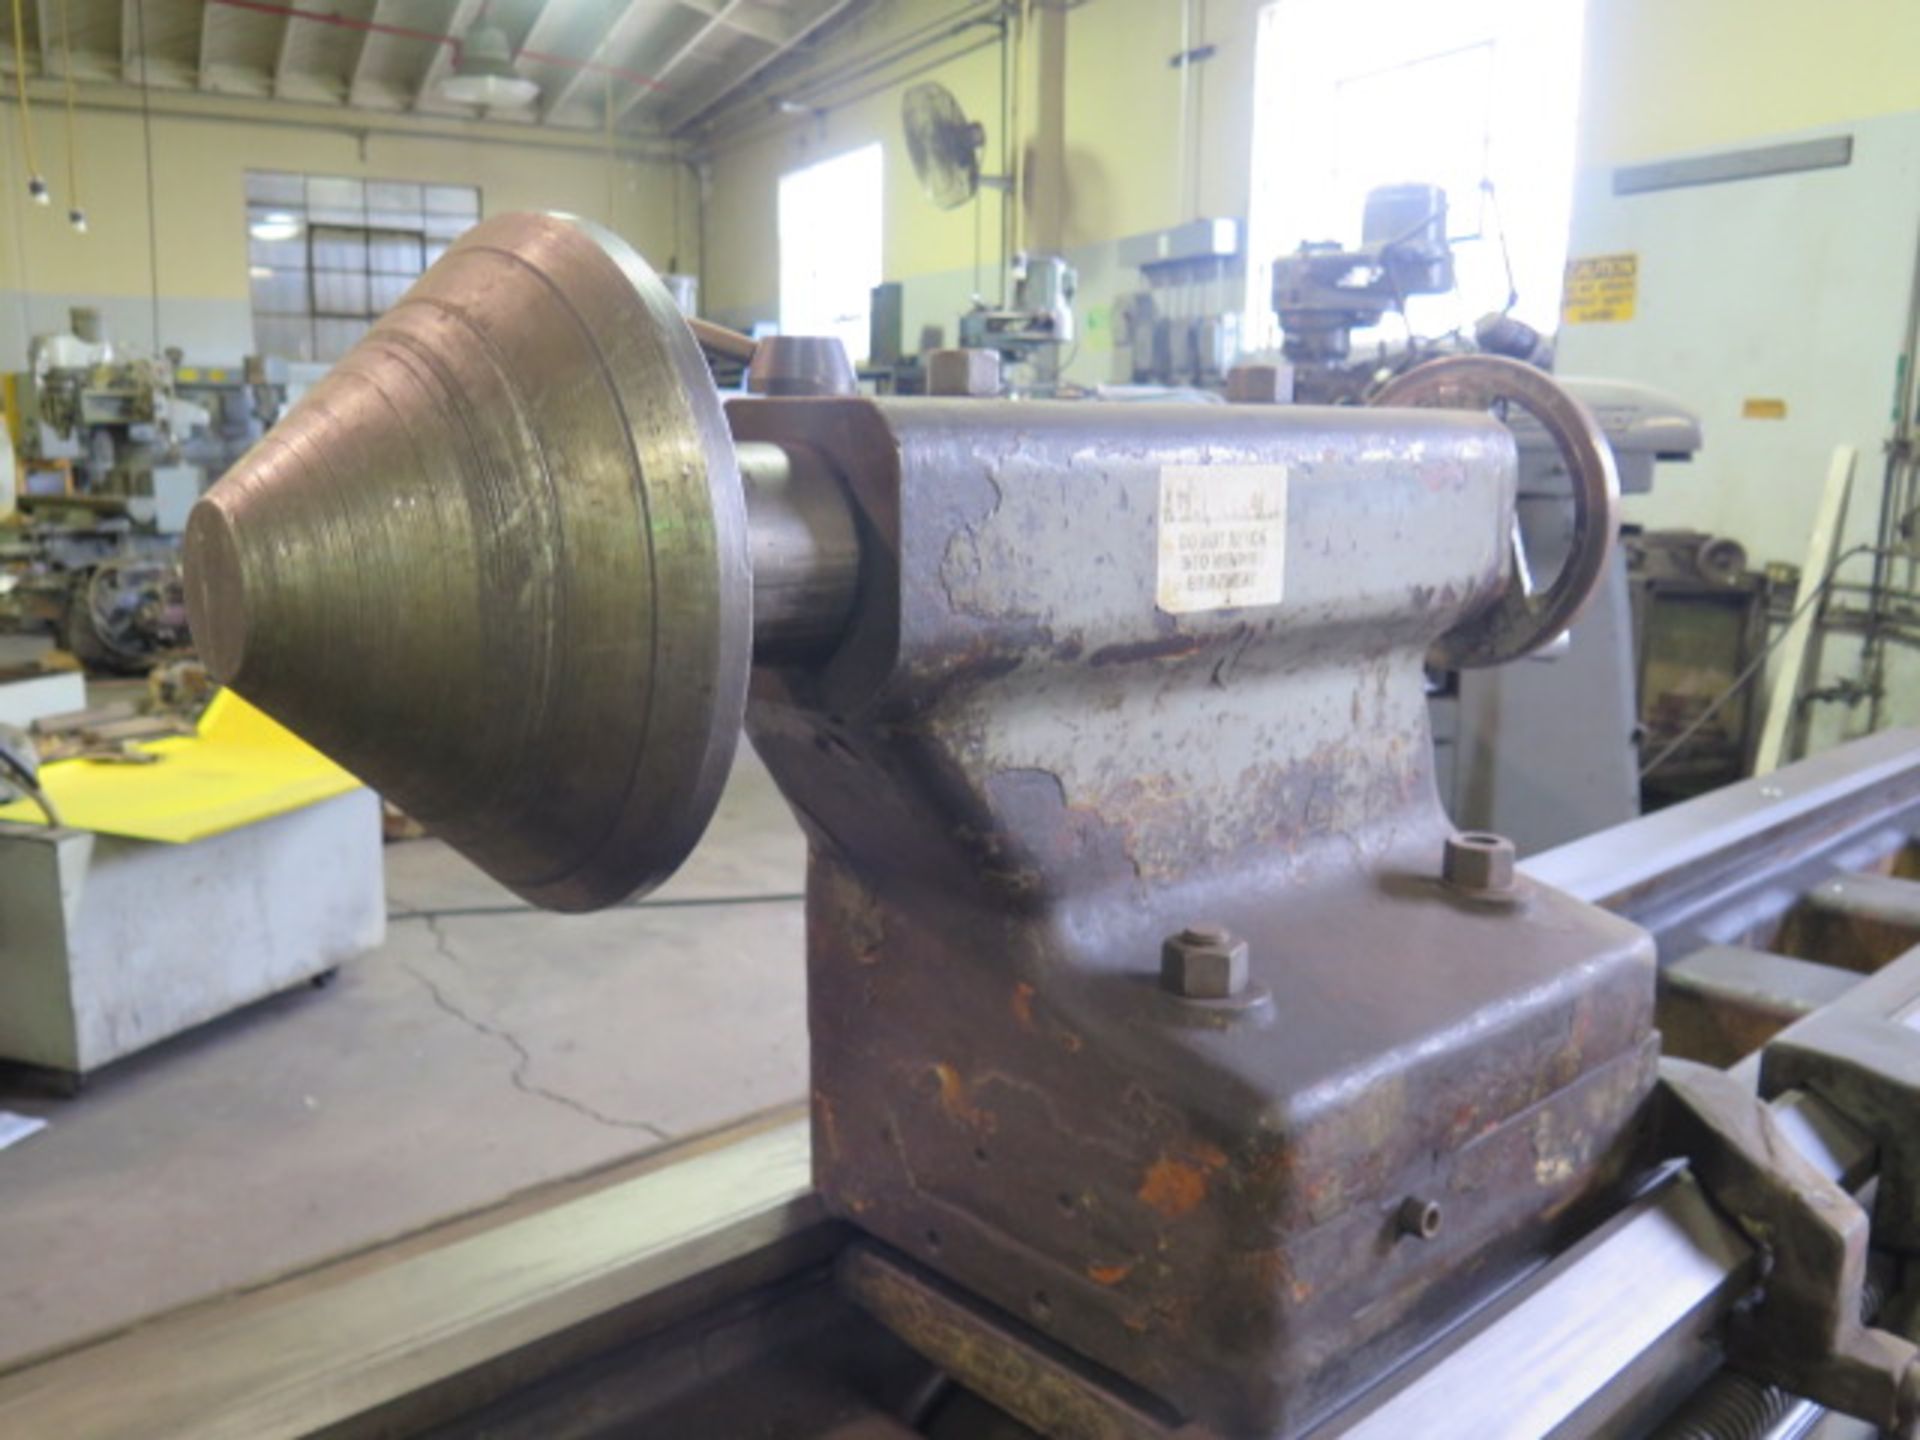 PBR TM-500 Big Bore Gap Lathe w/90-800 RPM, 5 7/8” Spindle Bore, Taper Attach, Inch/mm, SOLD AS IS - Image 17 of 21